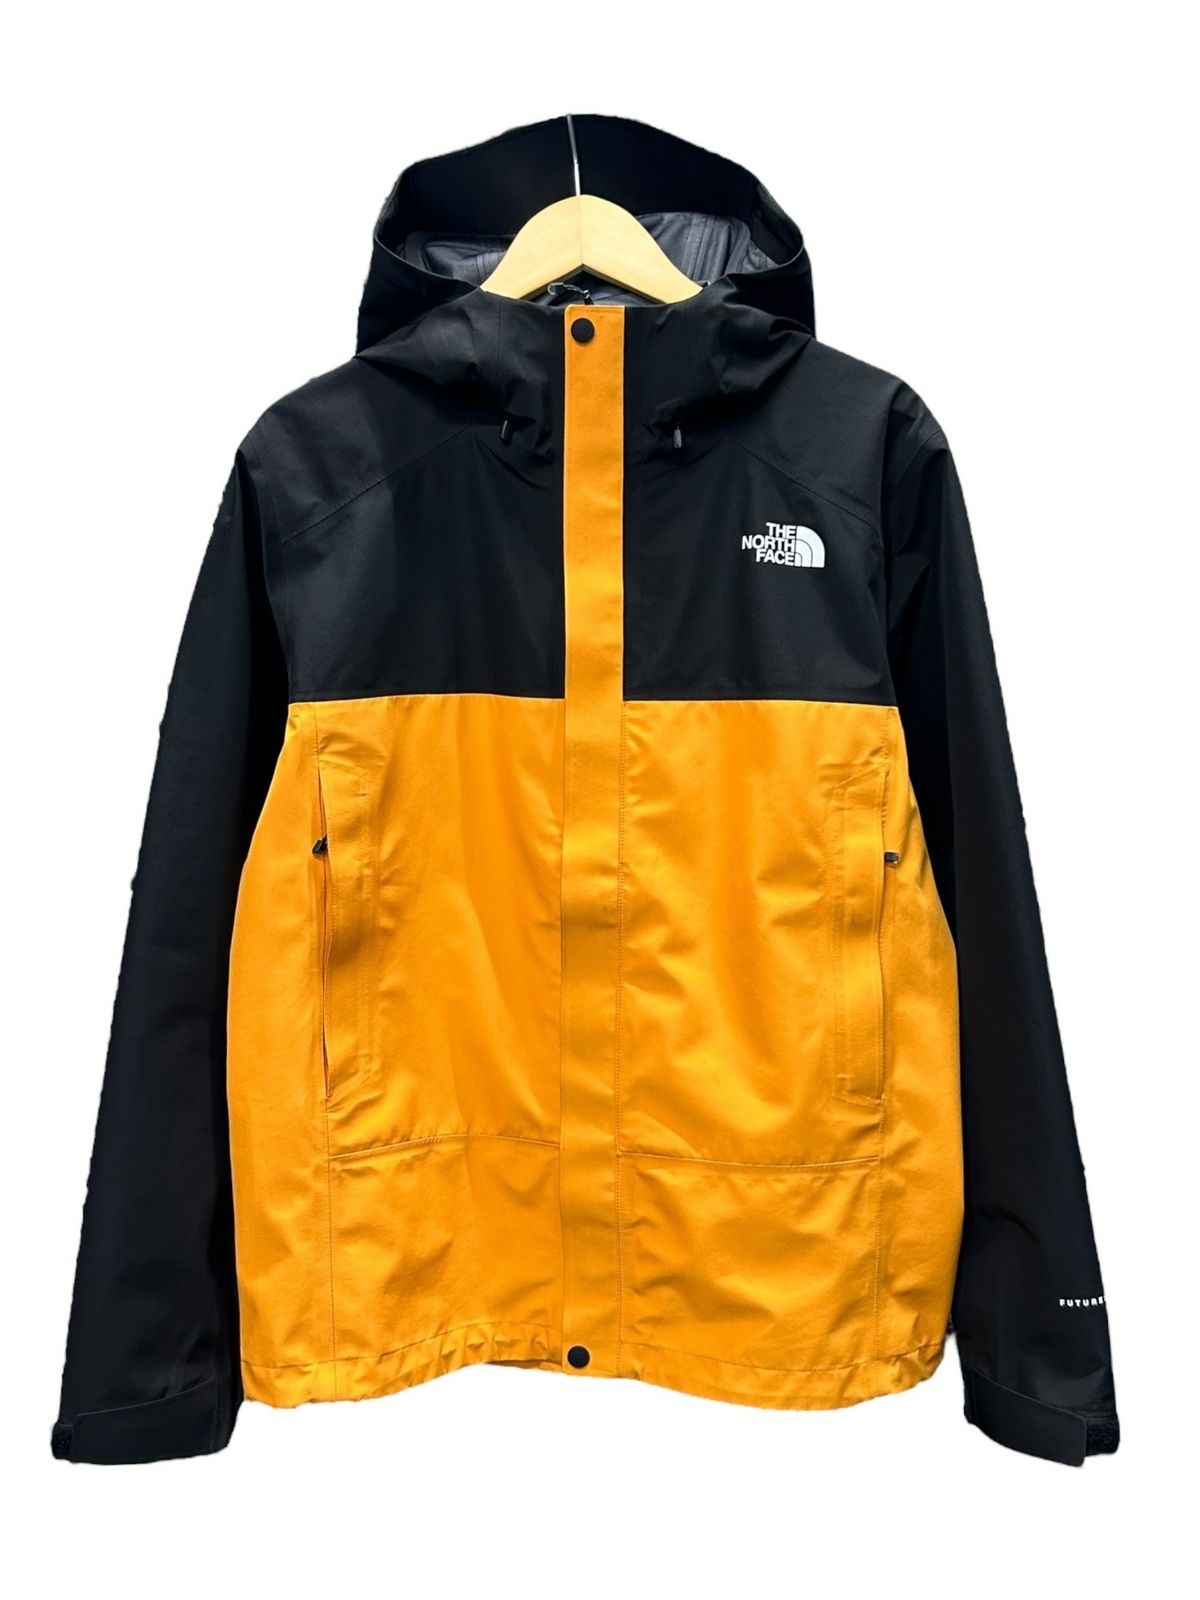 THE NORTH FACE (ザノースフェイス) FL Drizzle Jacket ドリズル 